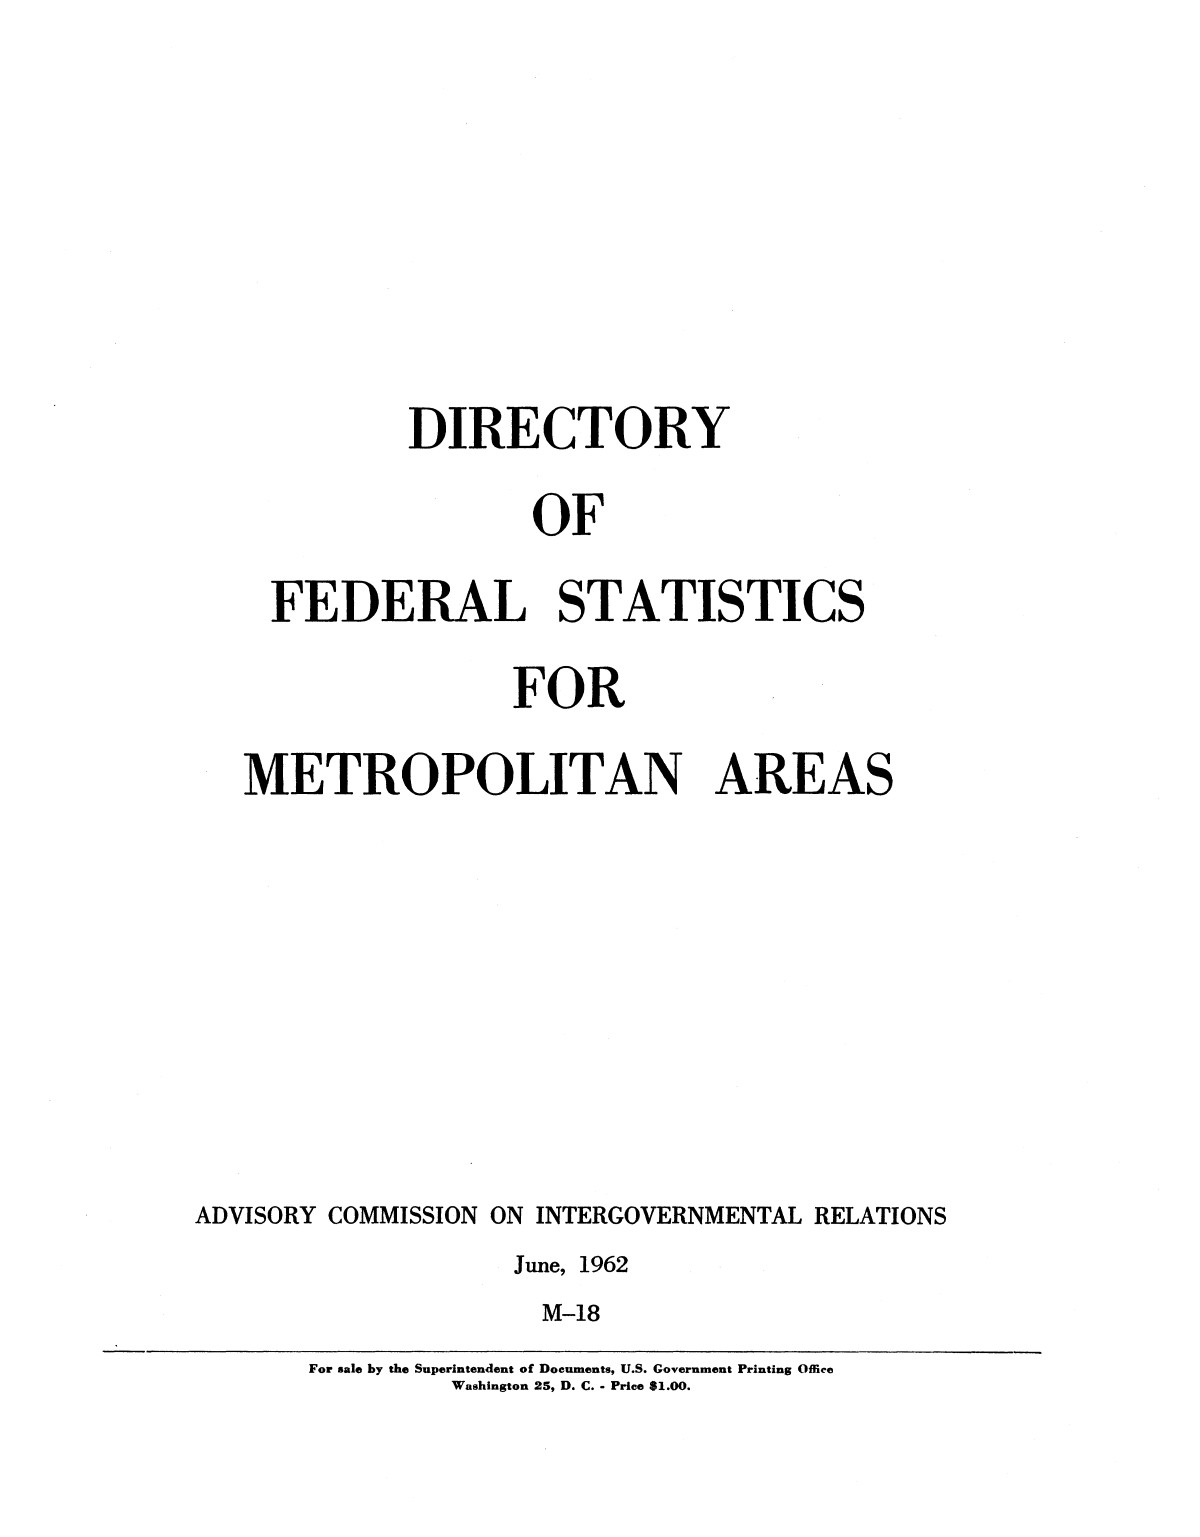 Directory of Federal statistics for metropolitan areas
                                                
                                                    I
                                                